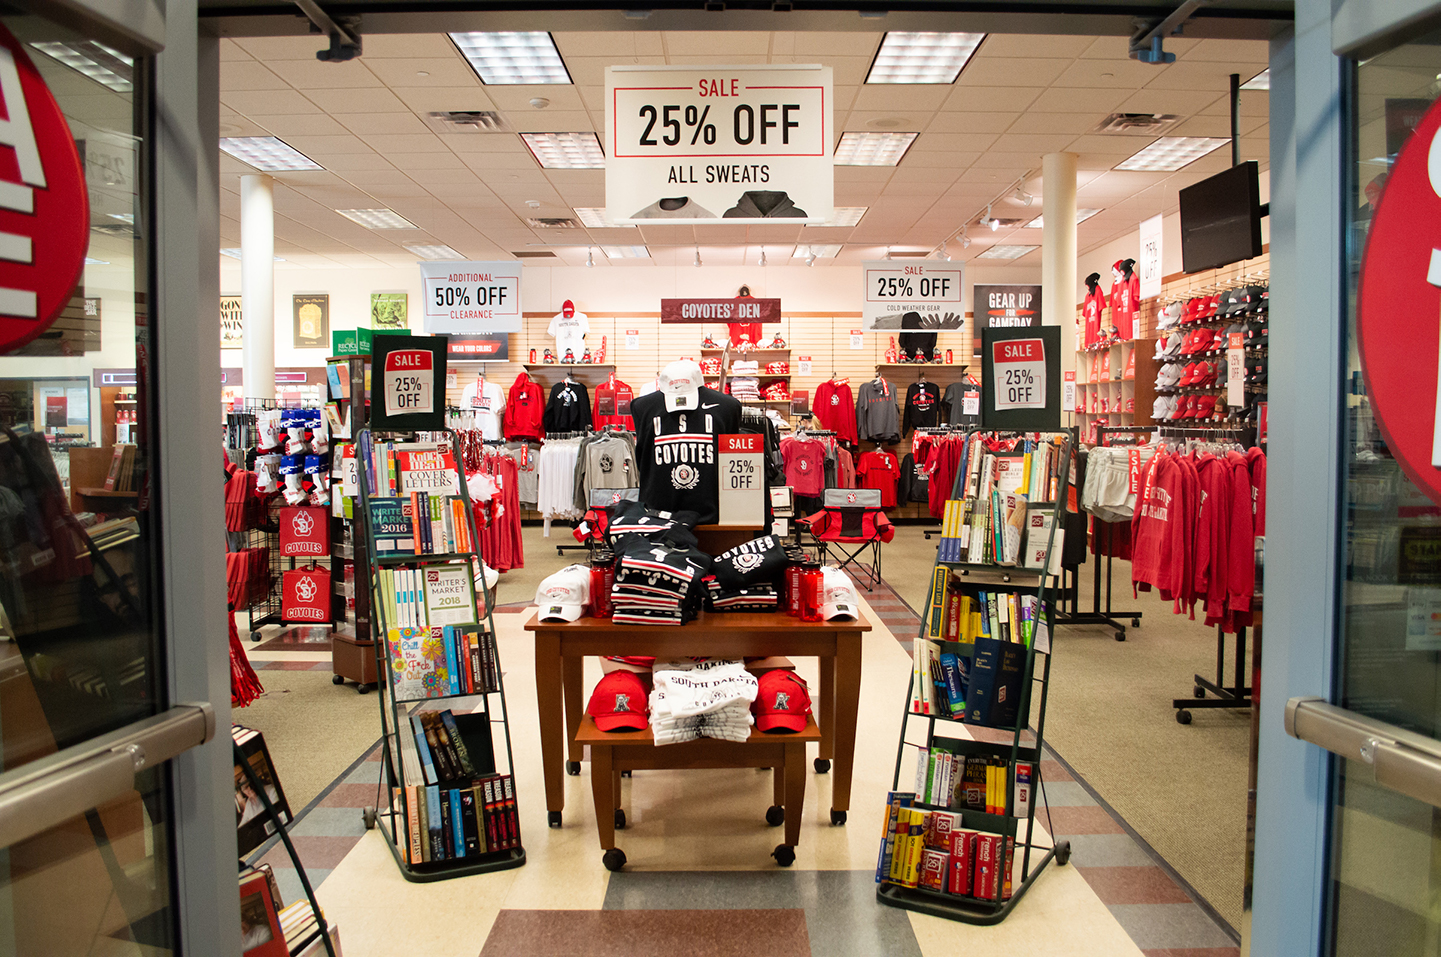 USD bookstore bypasses contract renewal with Barnes & Noble, will convert to online platform